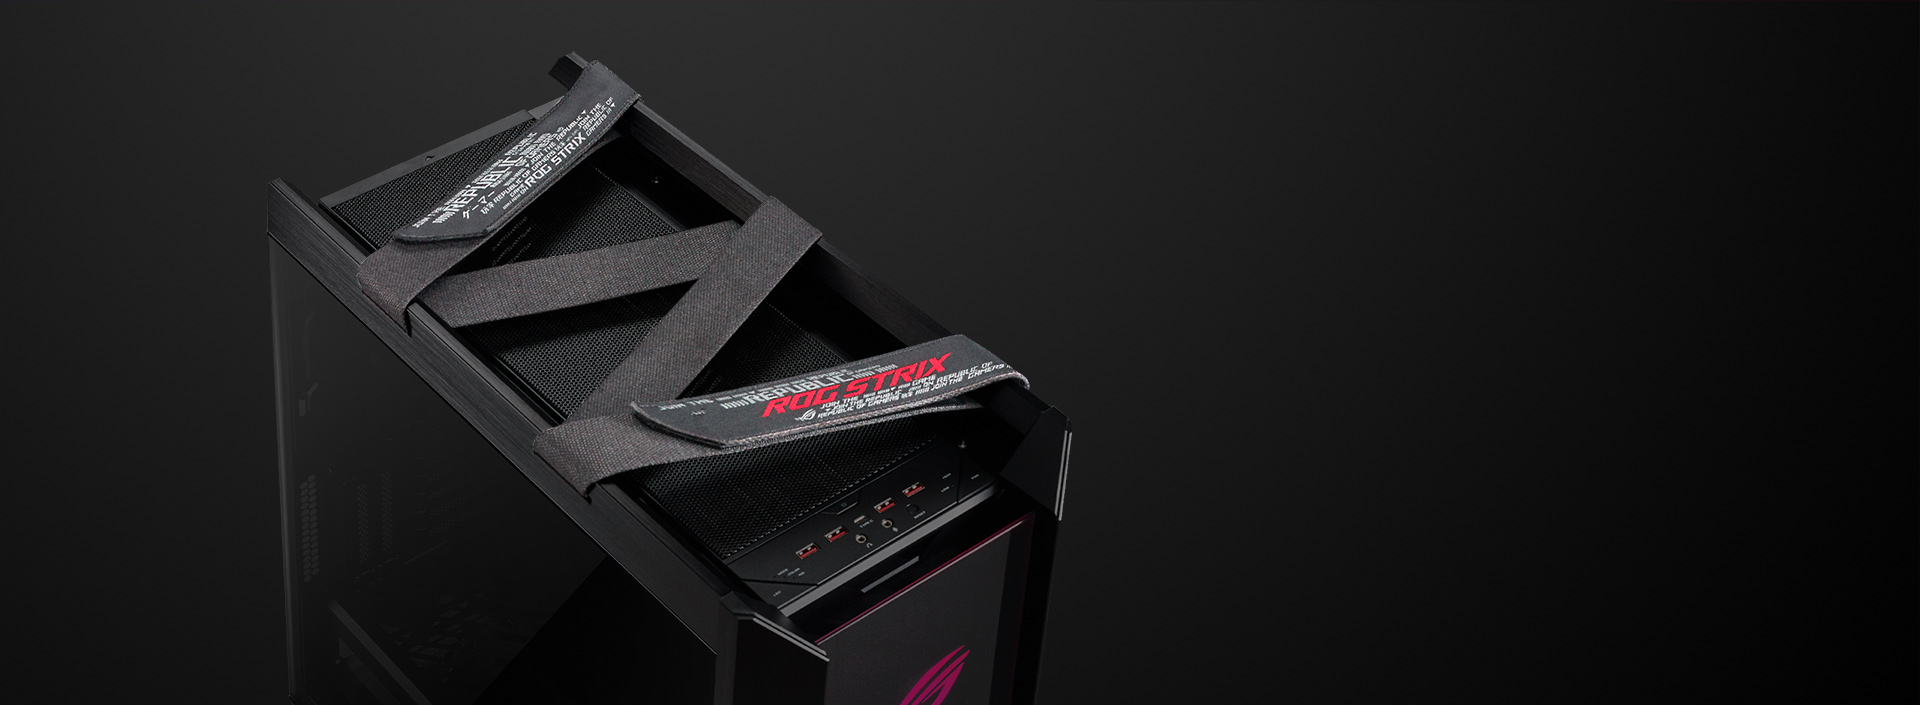 Comfortable case handles of ROG Strix chassis